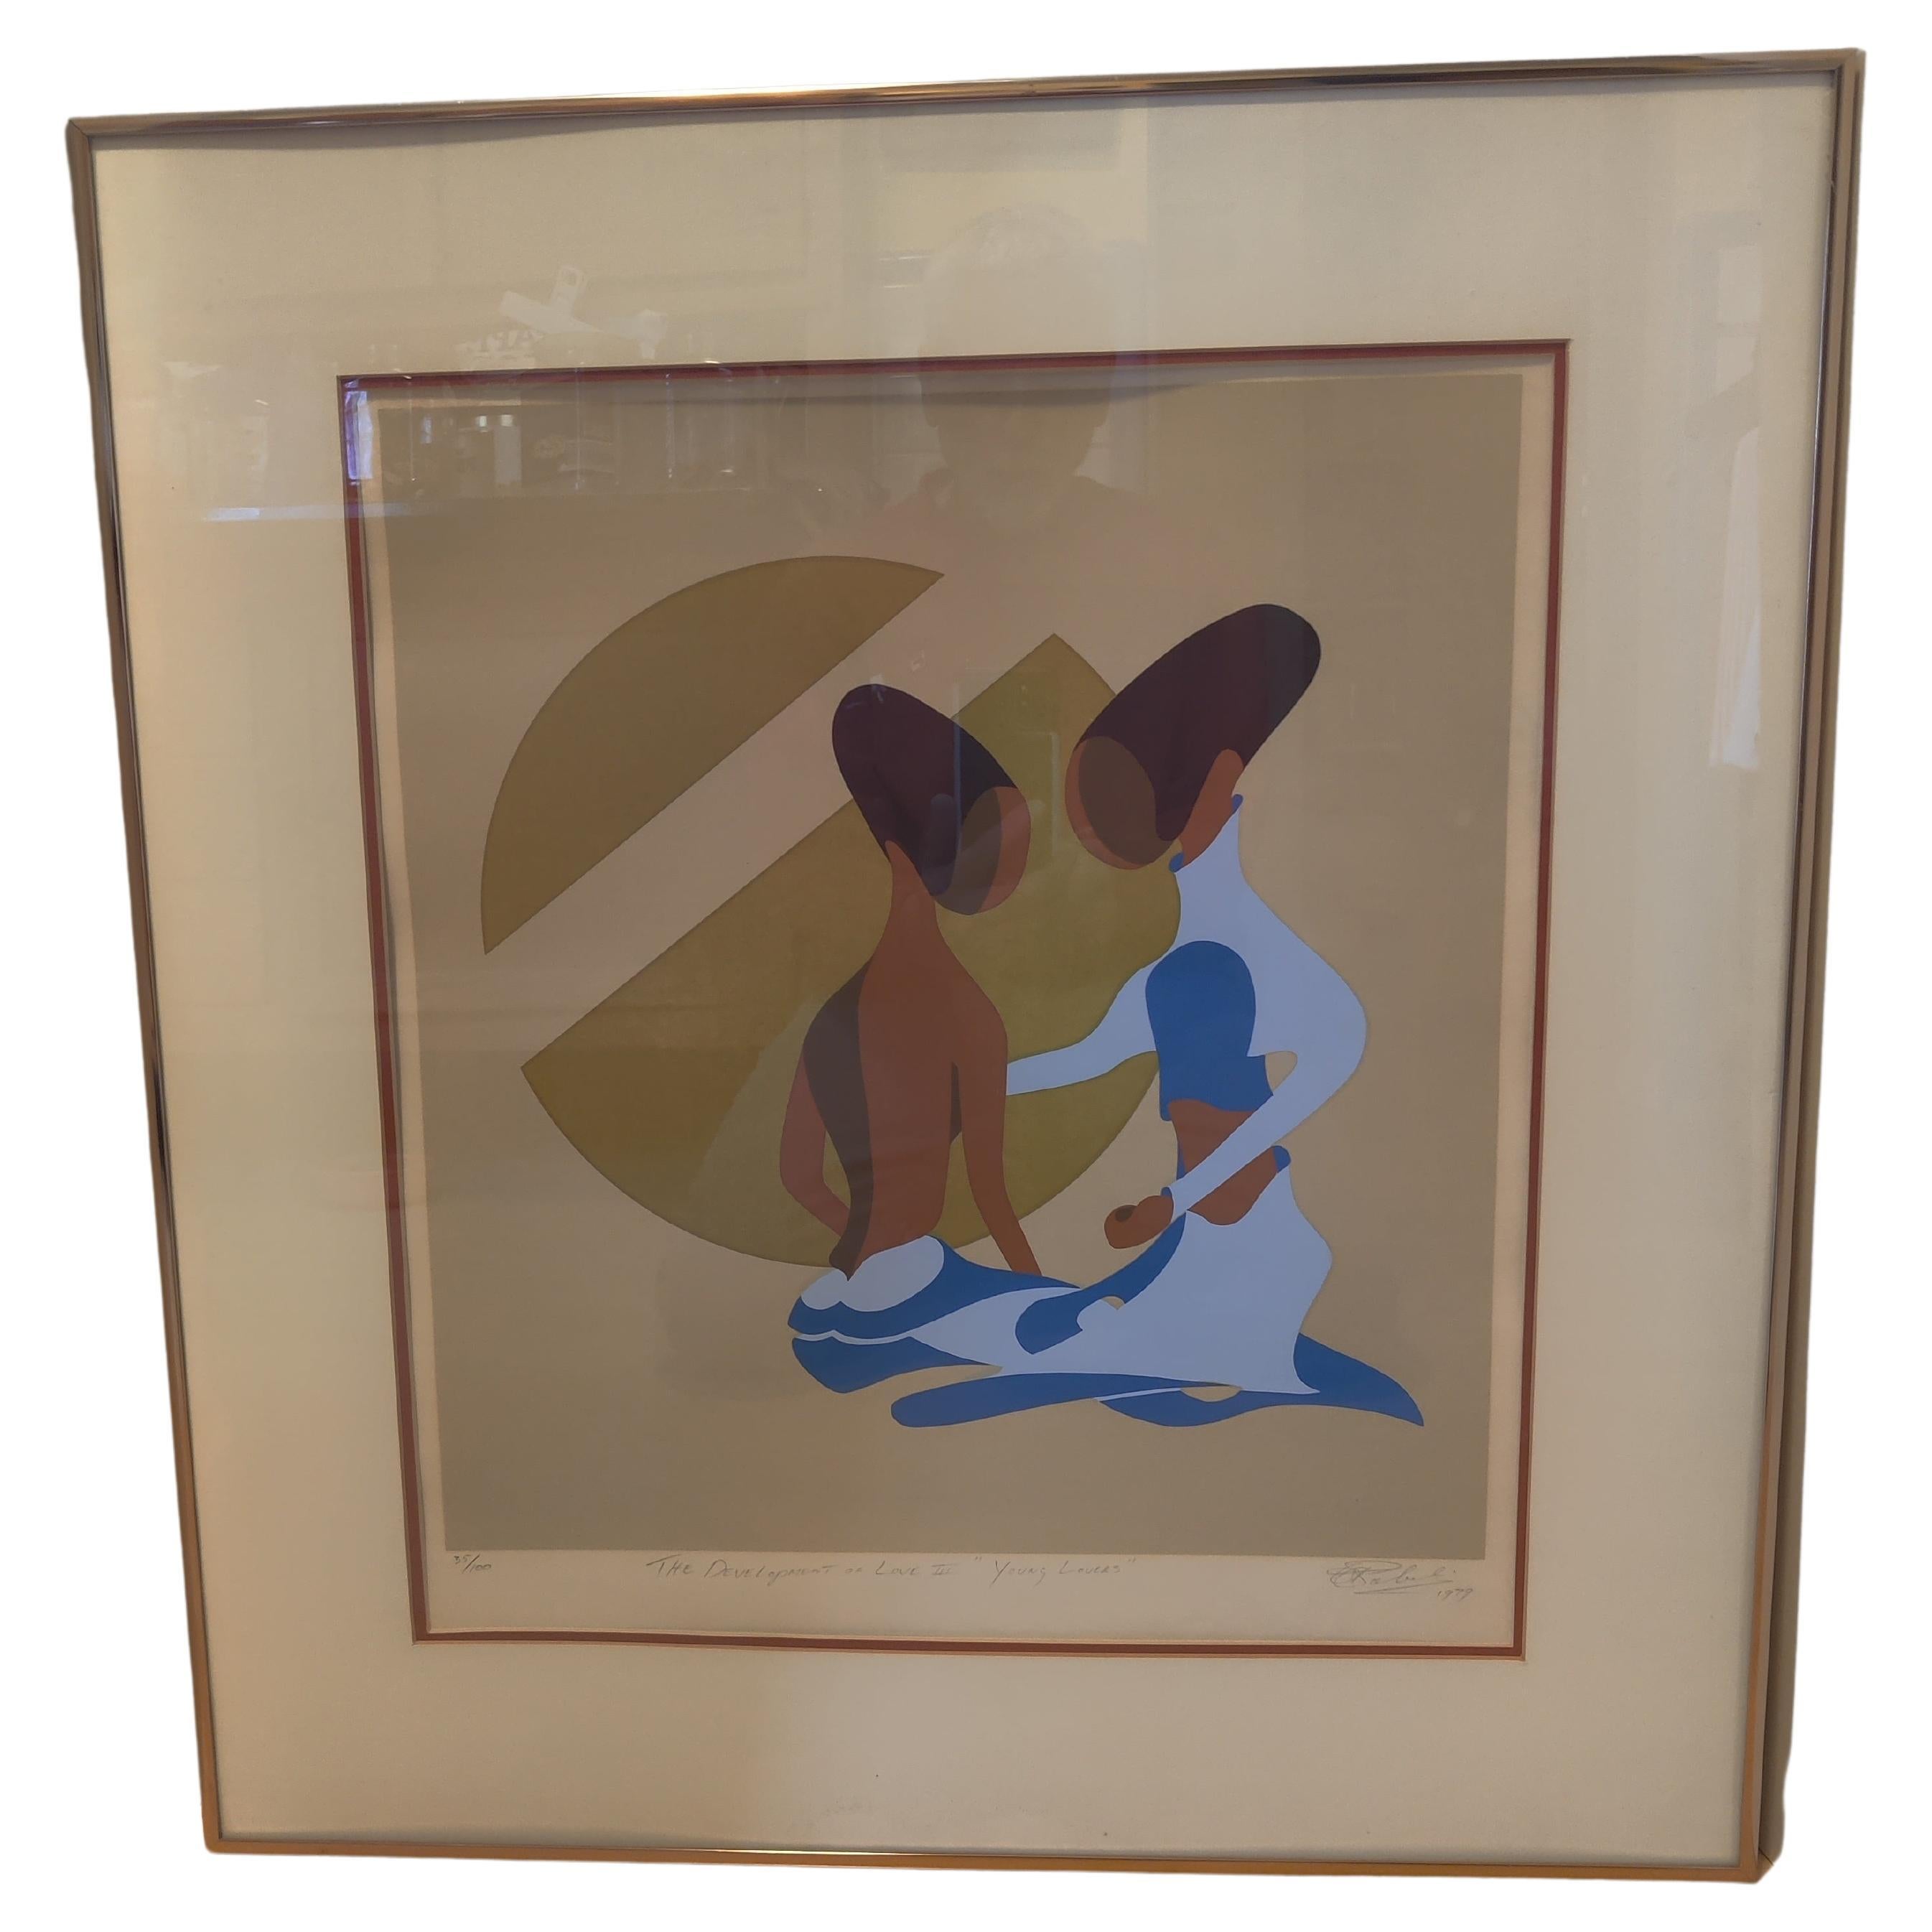 Huibert Sabelis 1979 "Young Lovers" Abstract Art signed and numbered 35/100